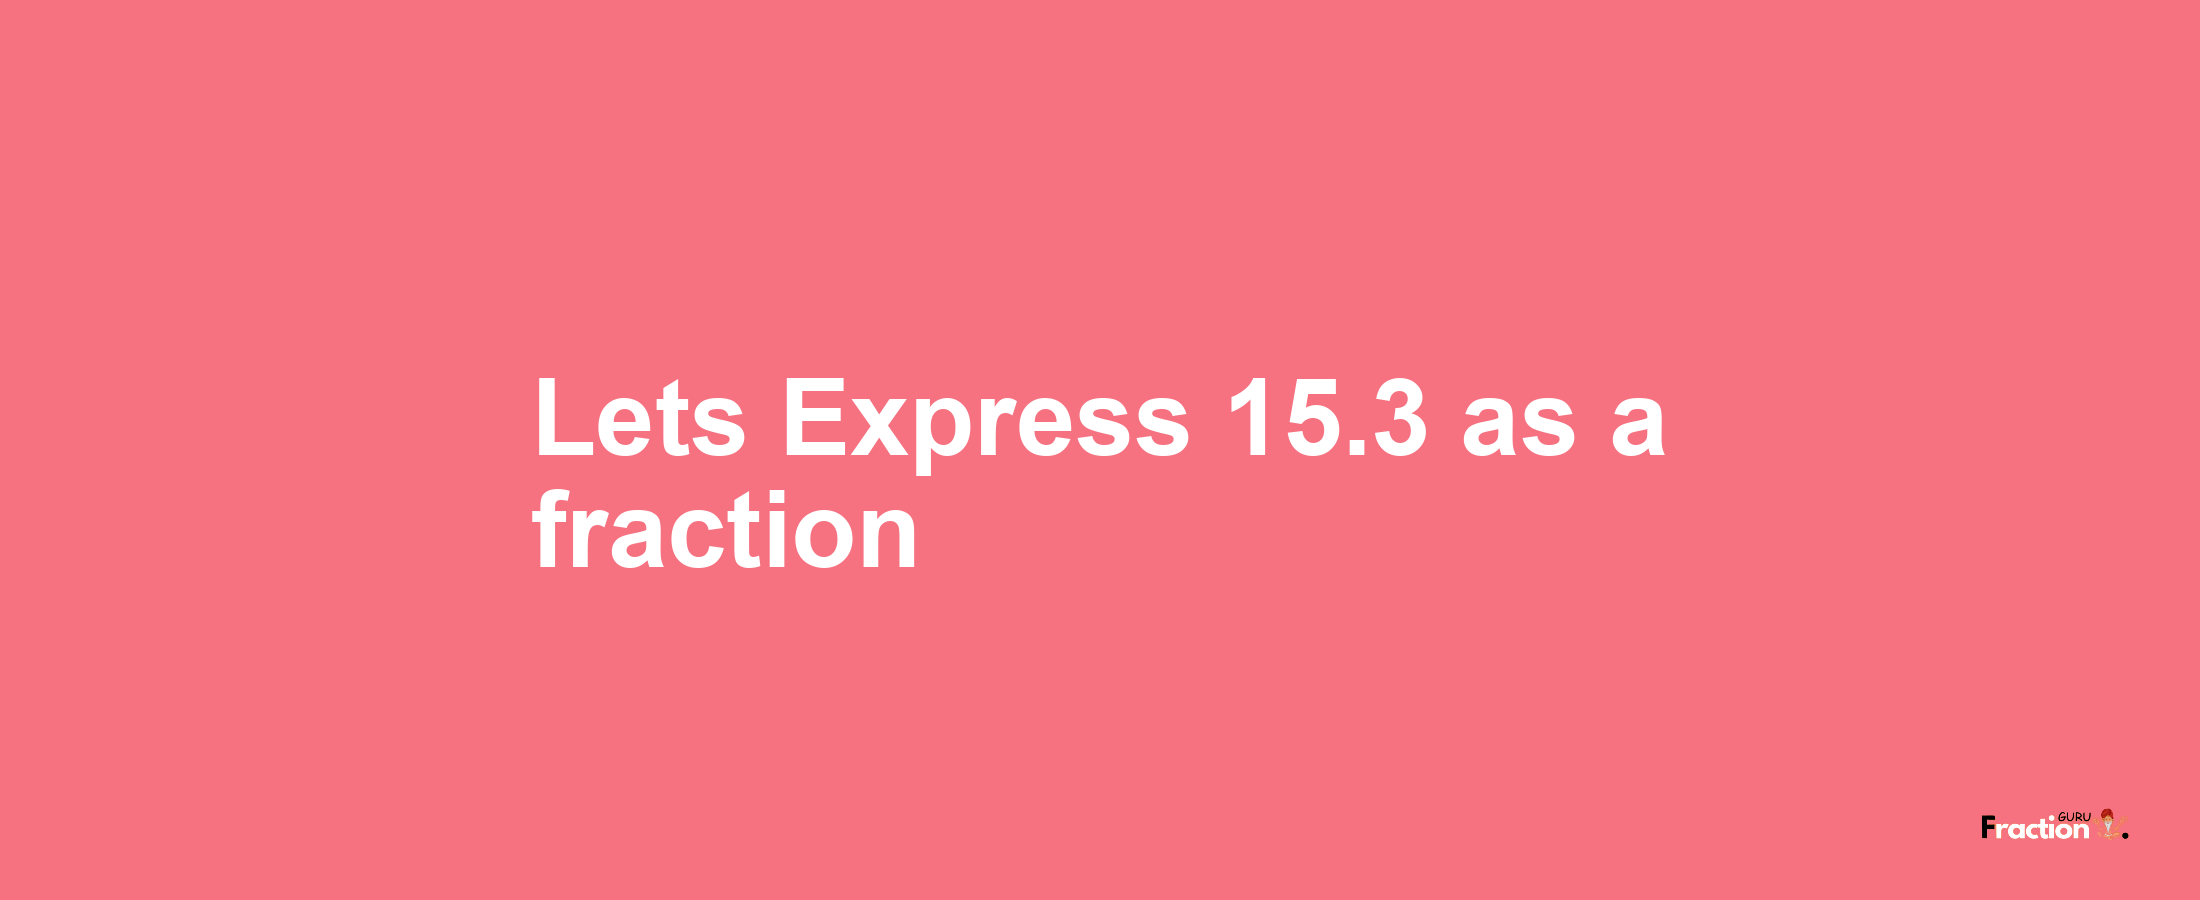 Lets Express 15.3 as afraction